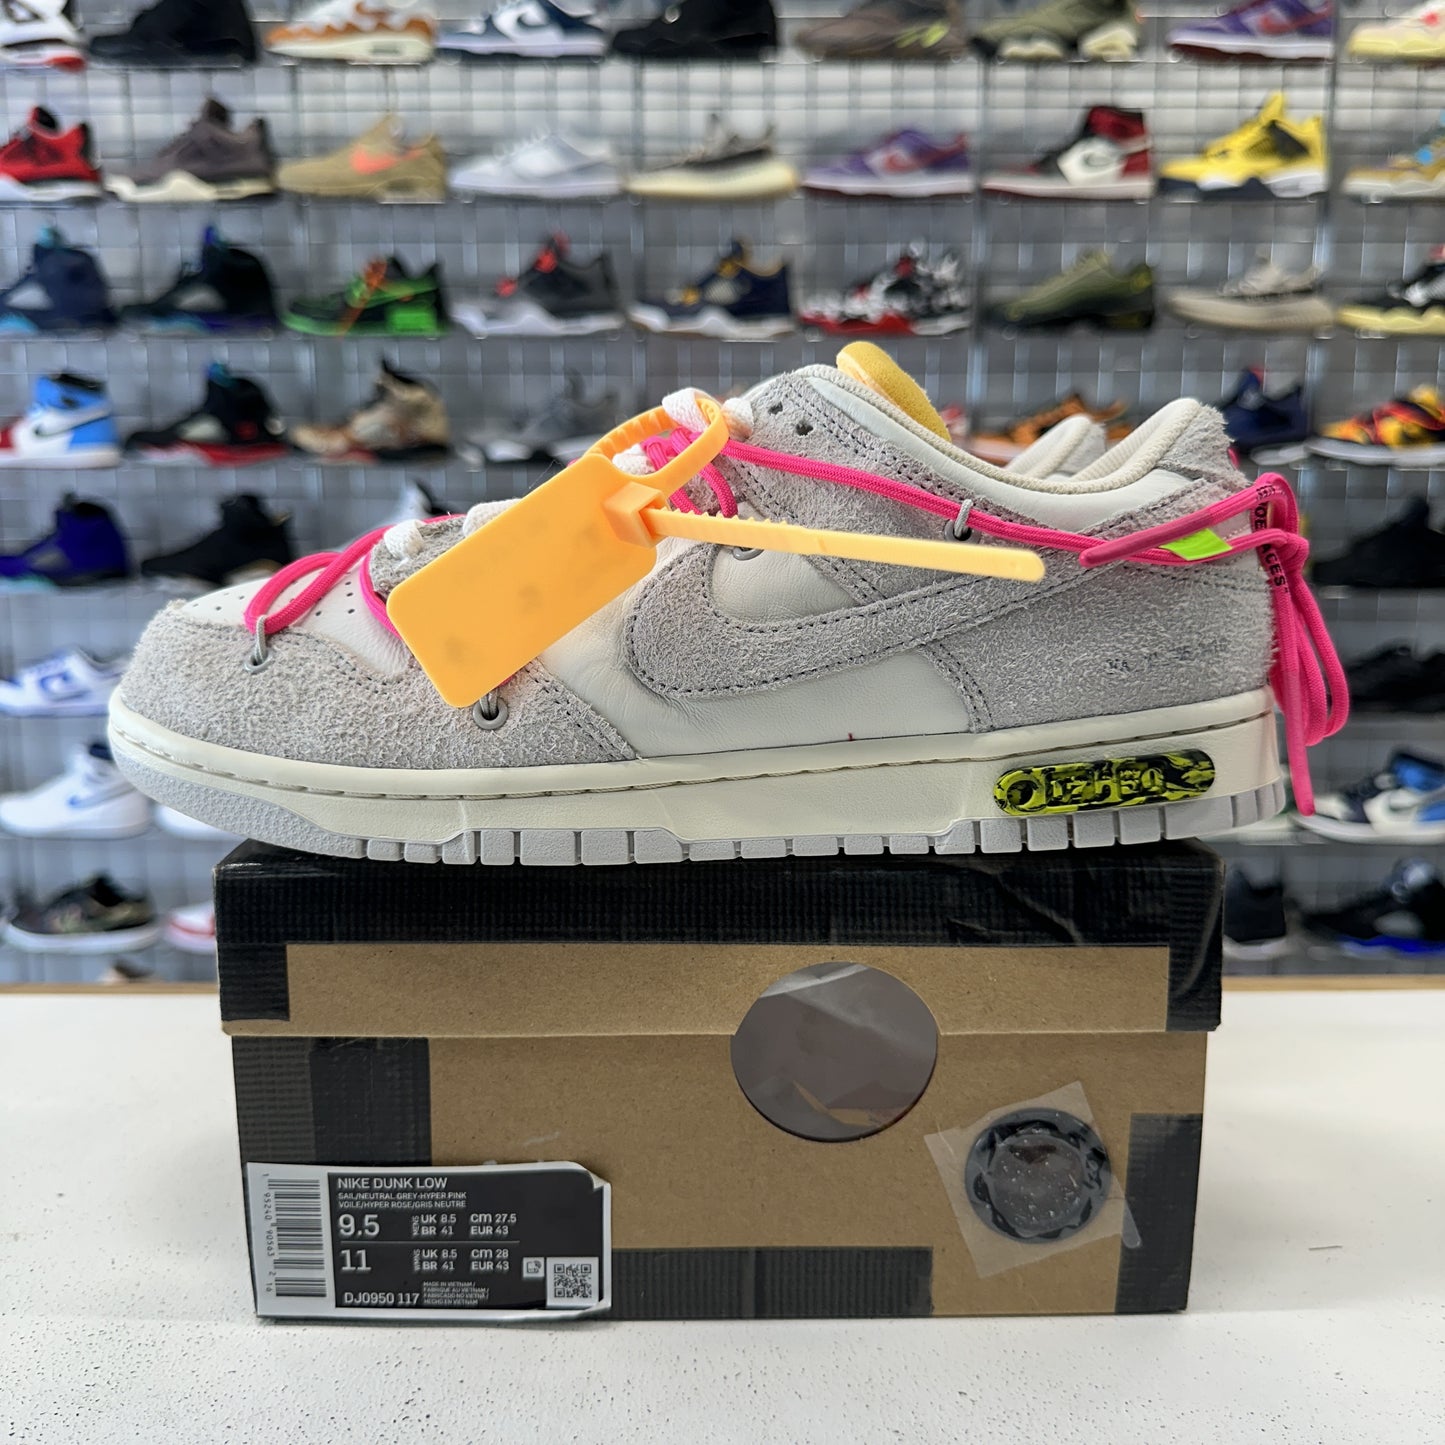 Off-White x Nike Dunk Low 'Lot 17 of 50' UK8.5